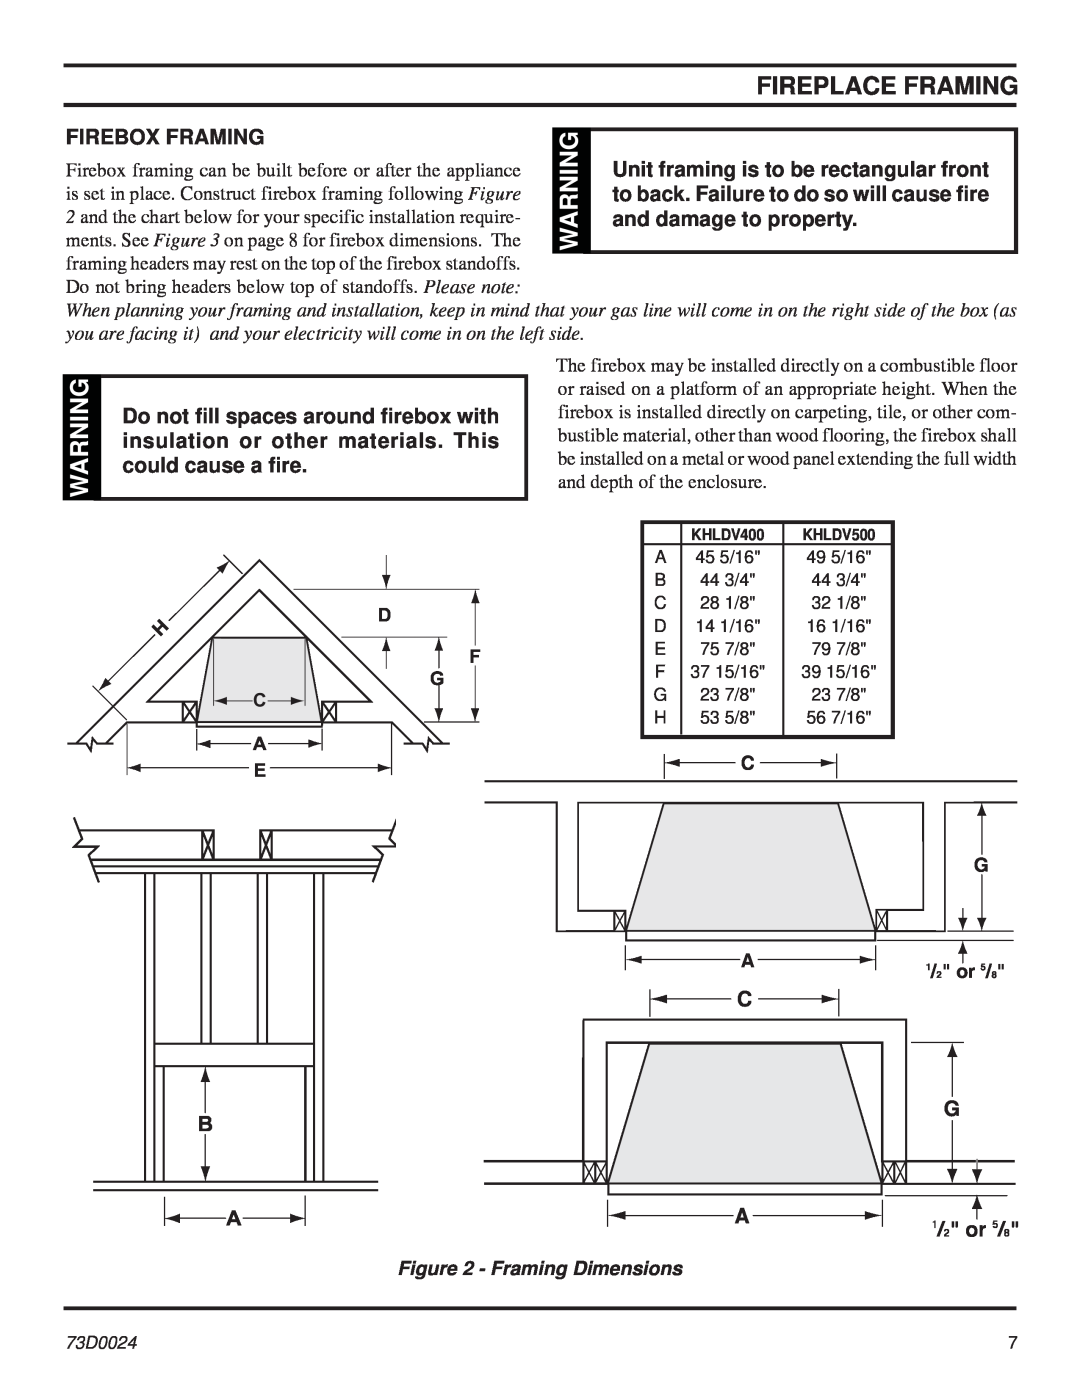 Monessen Hearth KHLDV SERIES manual Fireplace Framing, Firebox Framing, Unit framing is to be rectangular front, 1/2 or 5/8 